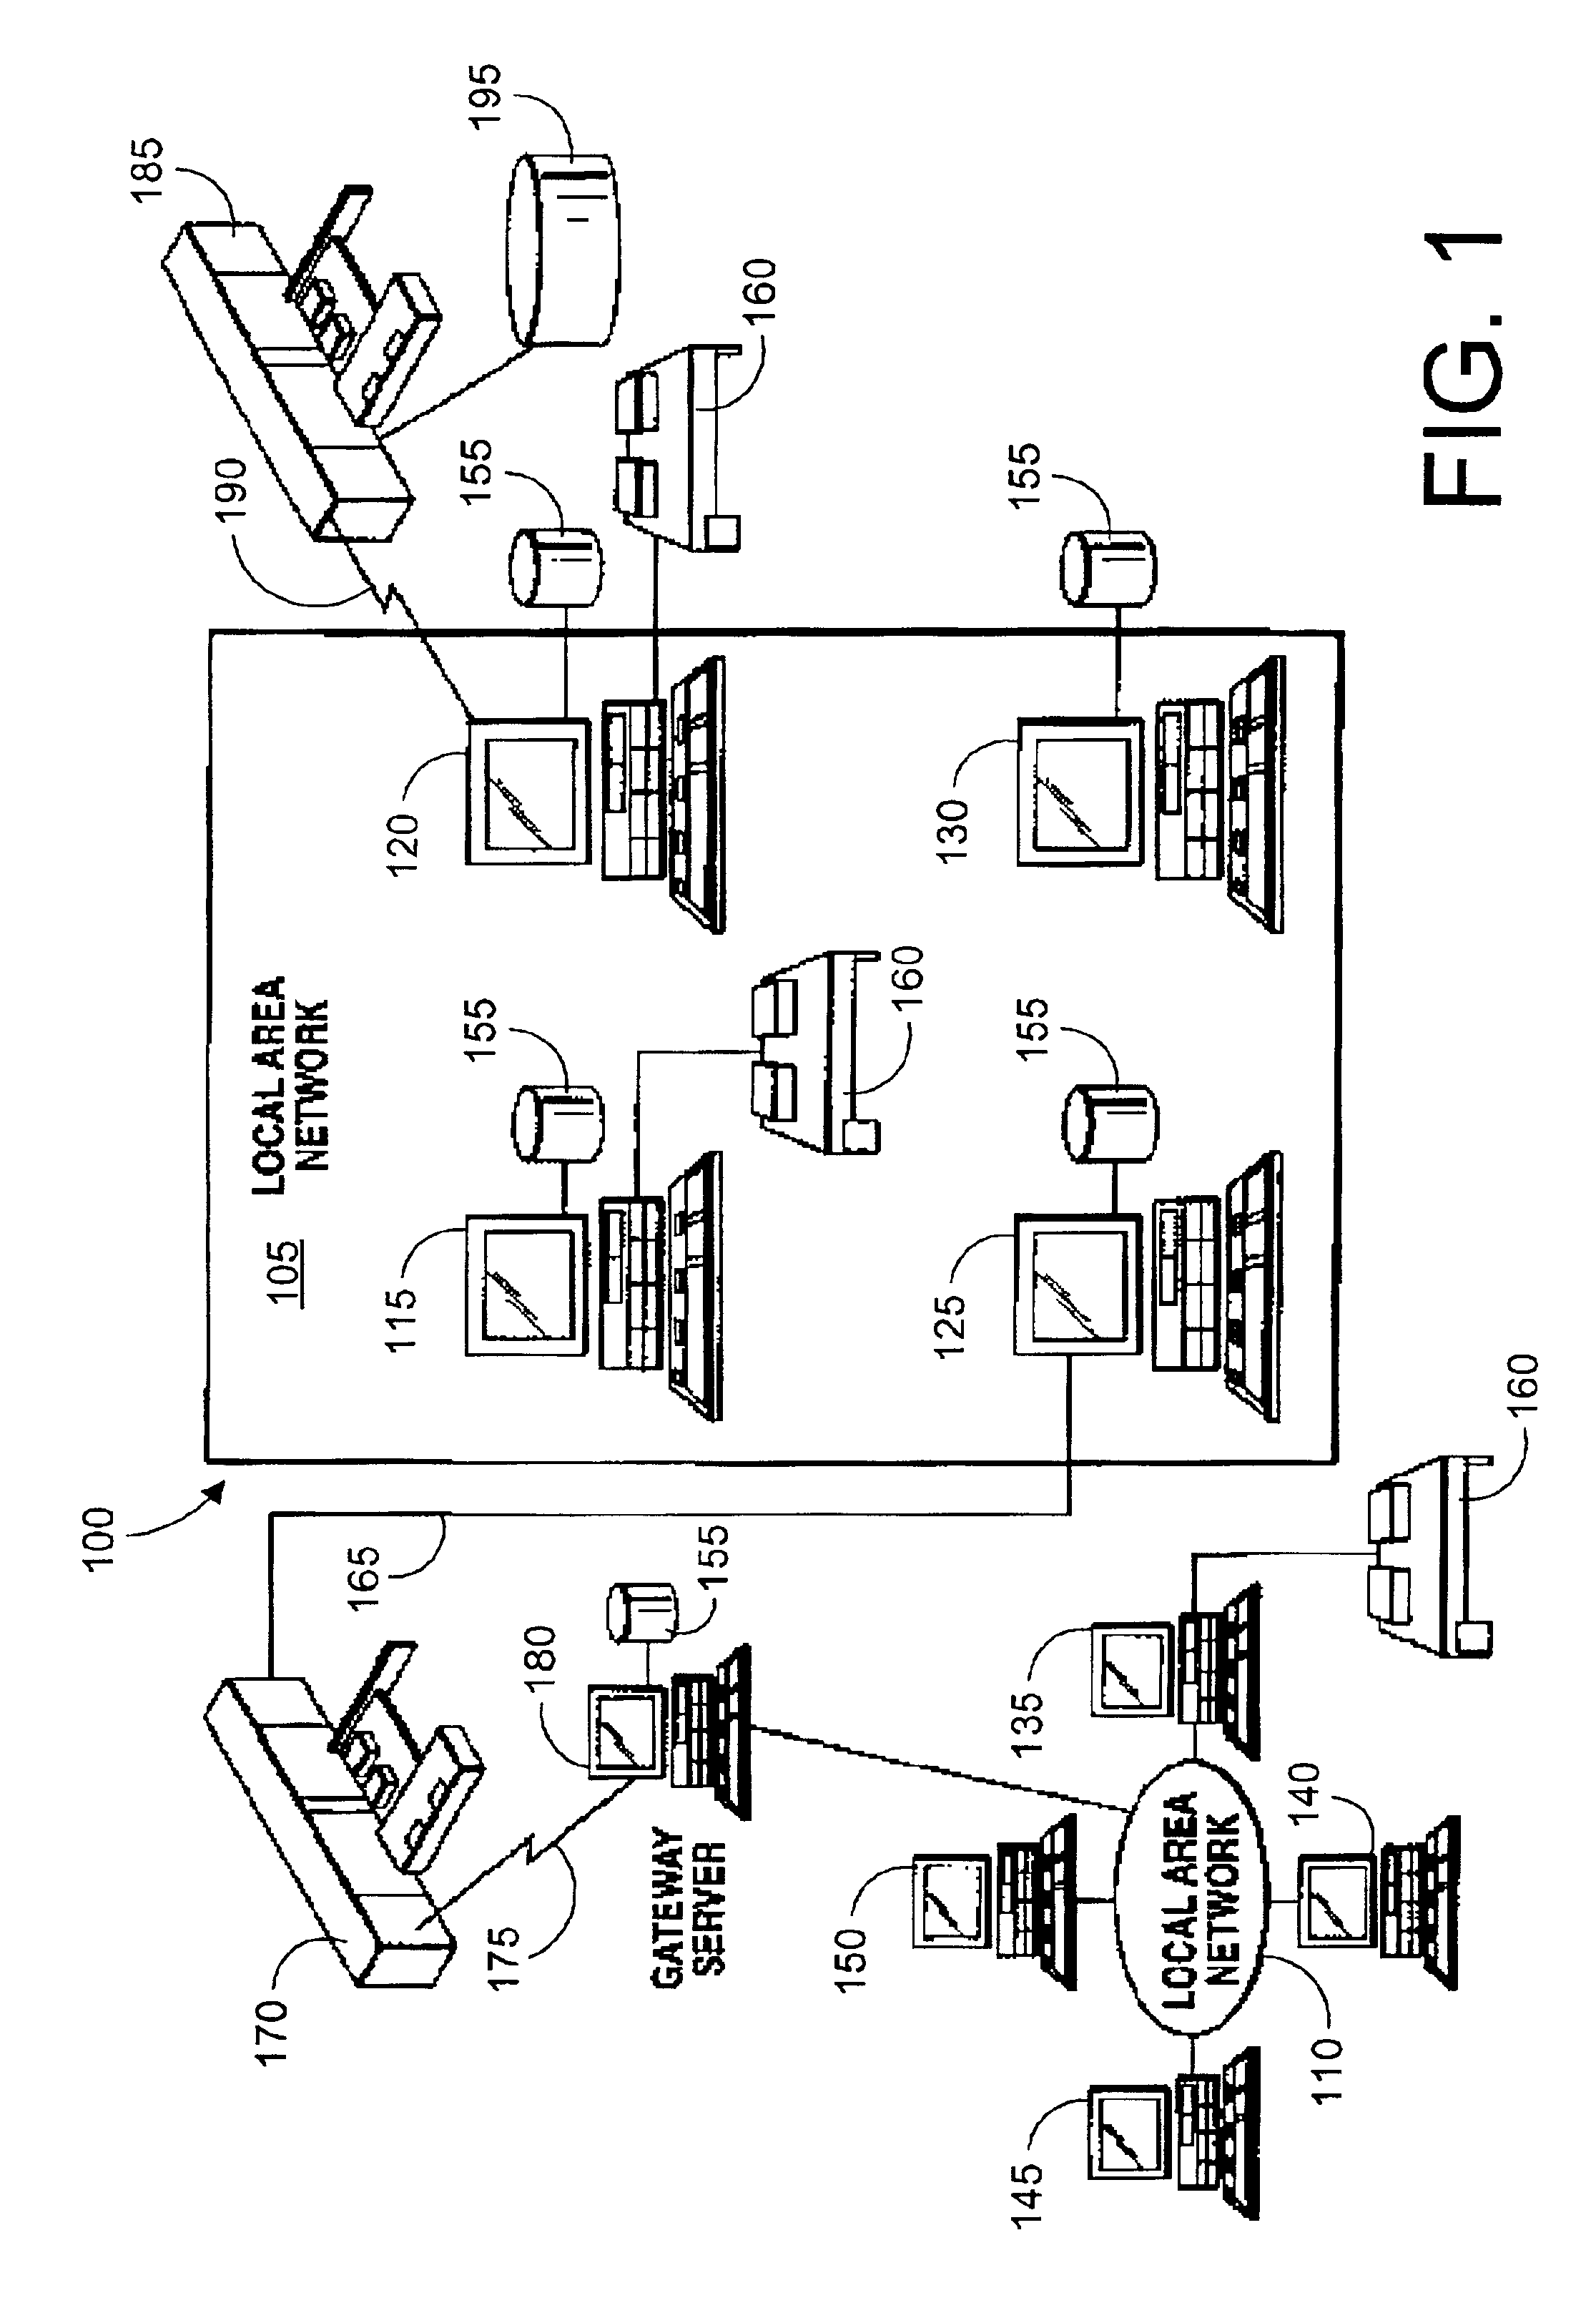 Method and system for creating and managing common and custom storage devices in a computer network